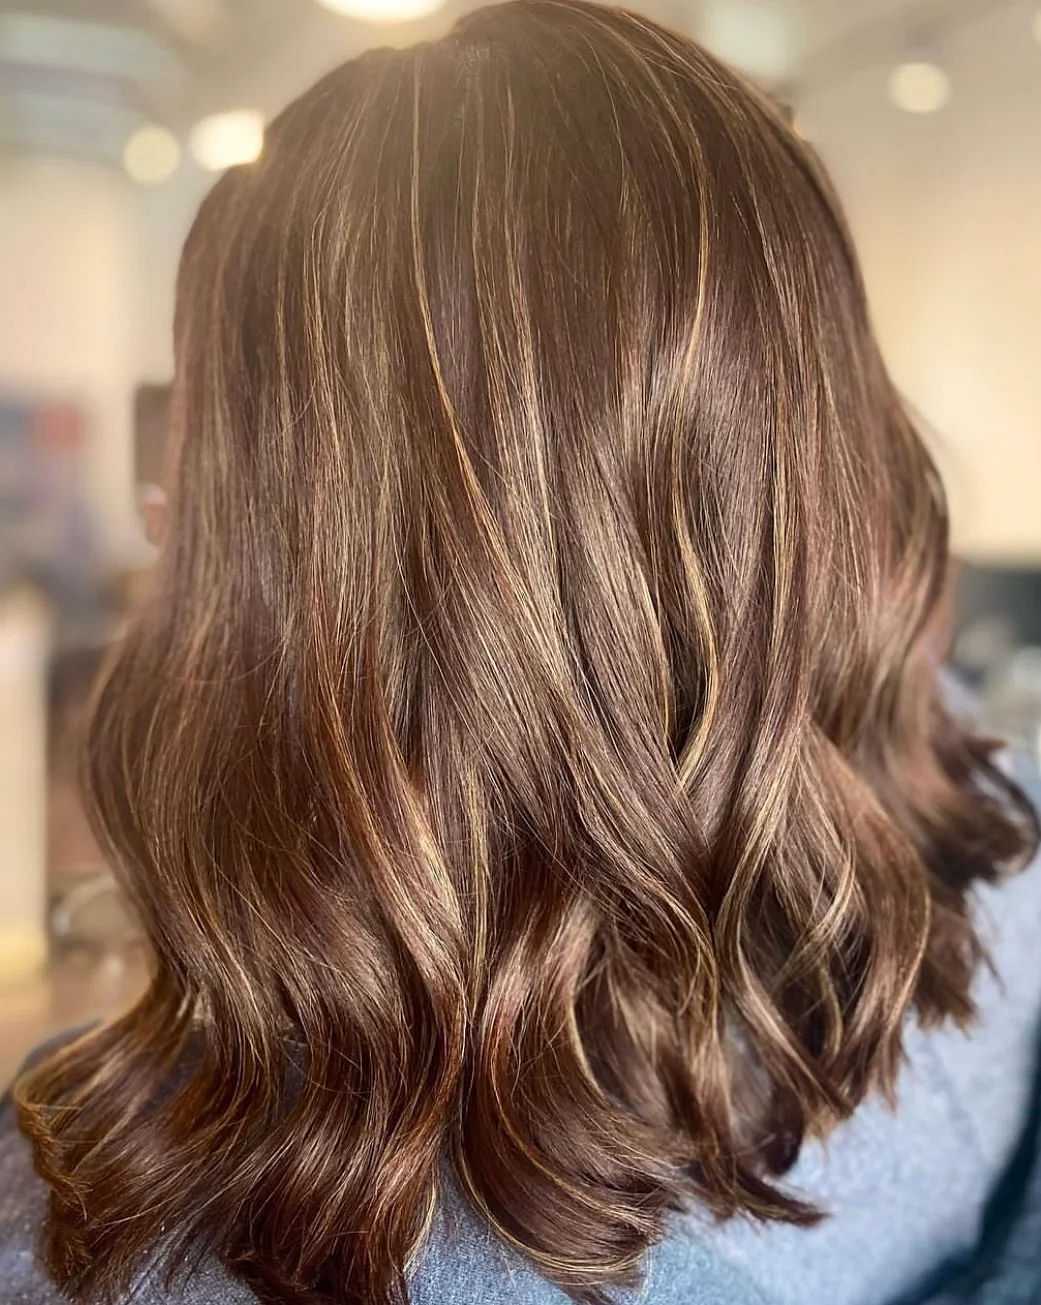 Wavy brown hair with blonde highlights, shown from the back in a well-lit salon setting.